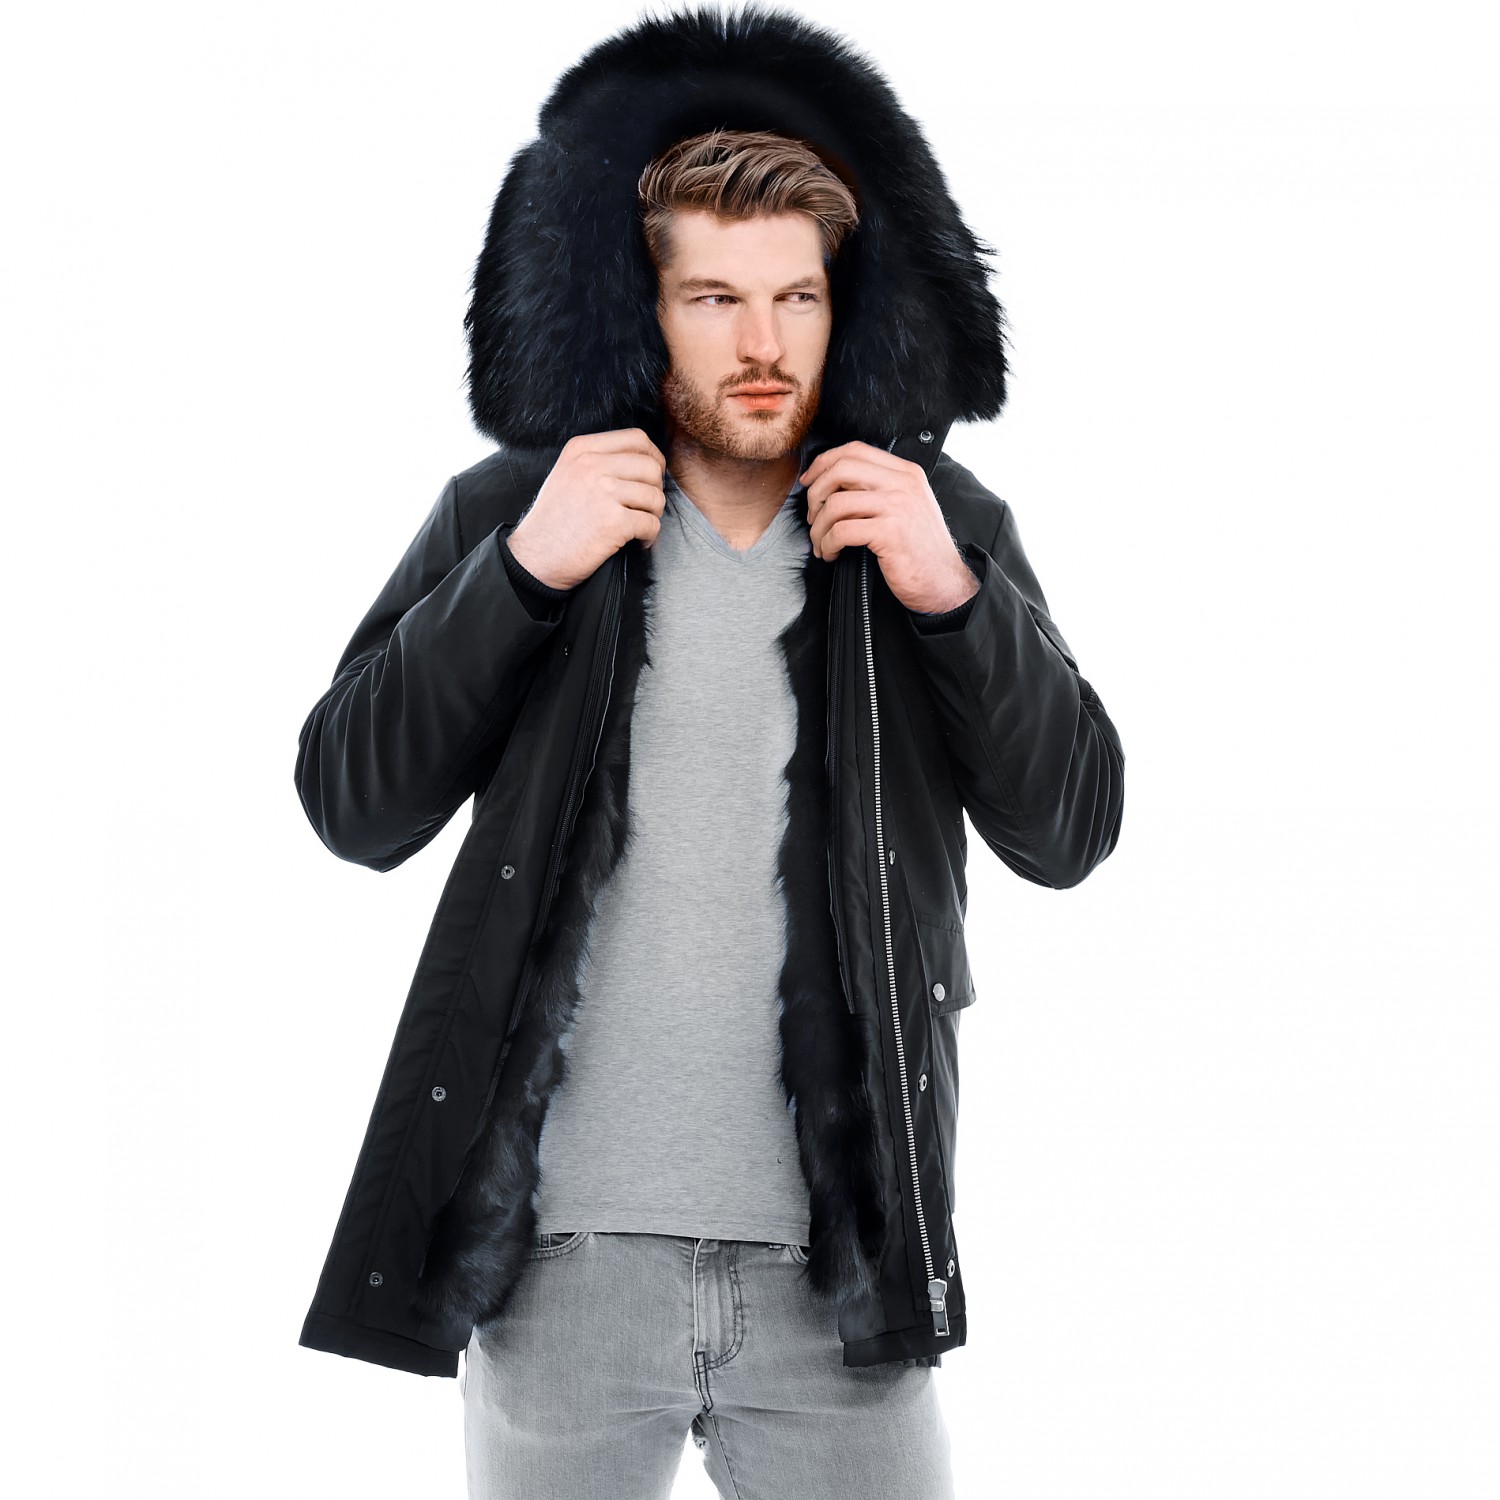 HOWON Mens Casual Sherpa Fleece Lined Jacket Warm Coat with Fur Collar